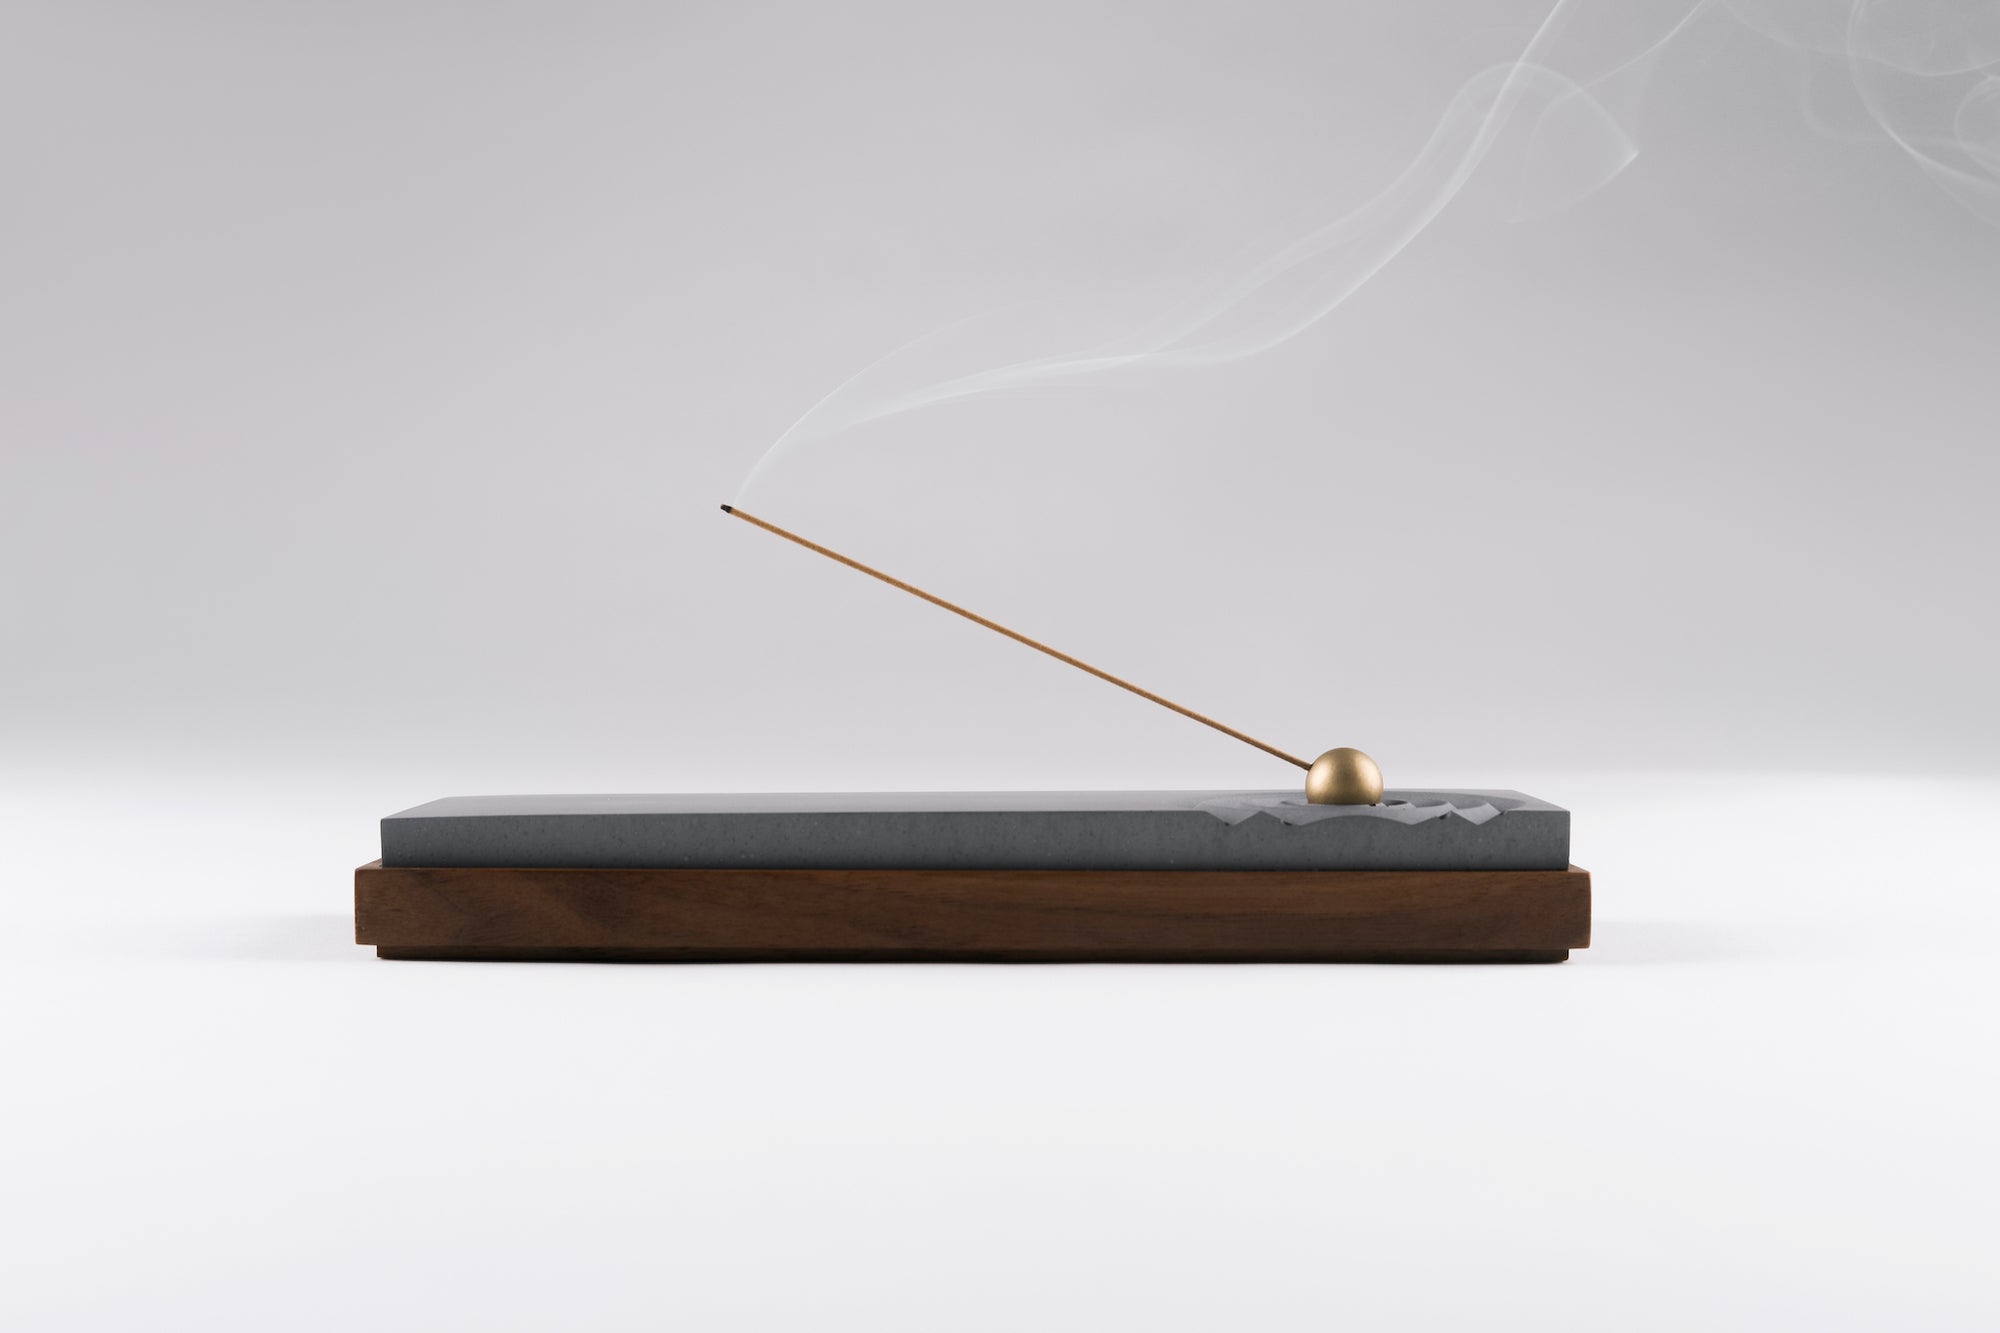 A Step-by-Step Guide to Light and Put out Incense Sticks - Kin Objects